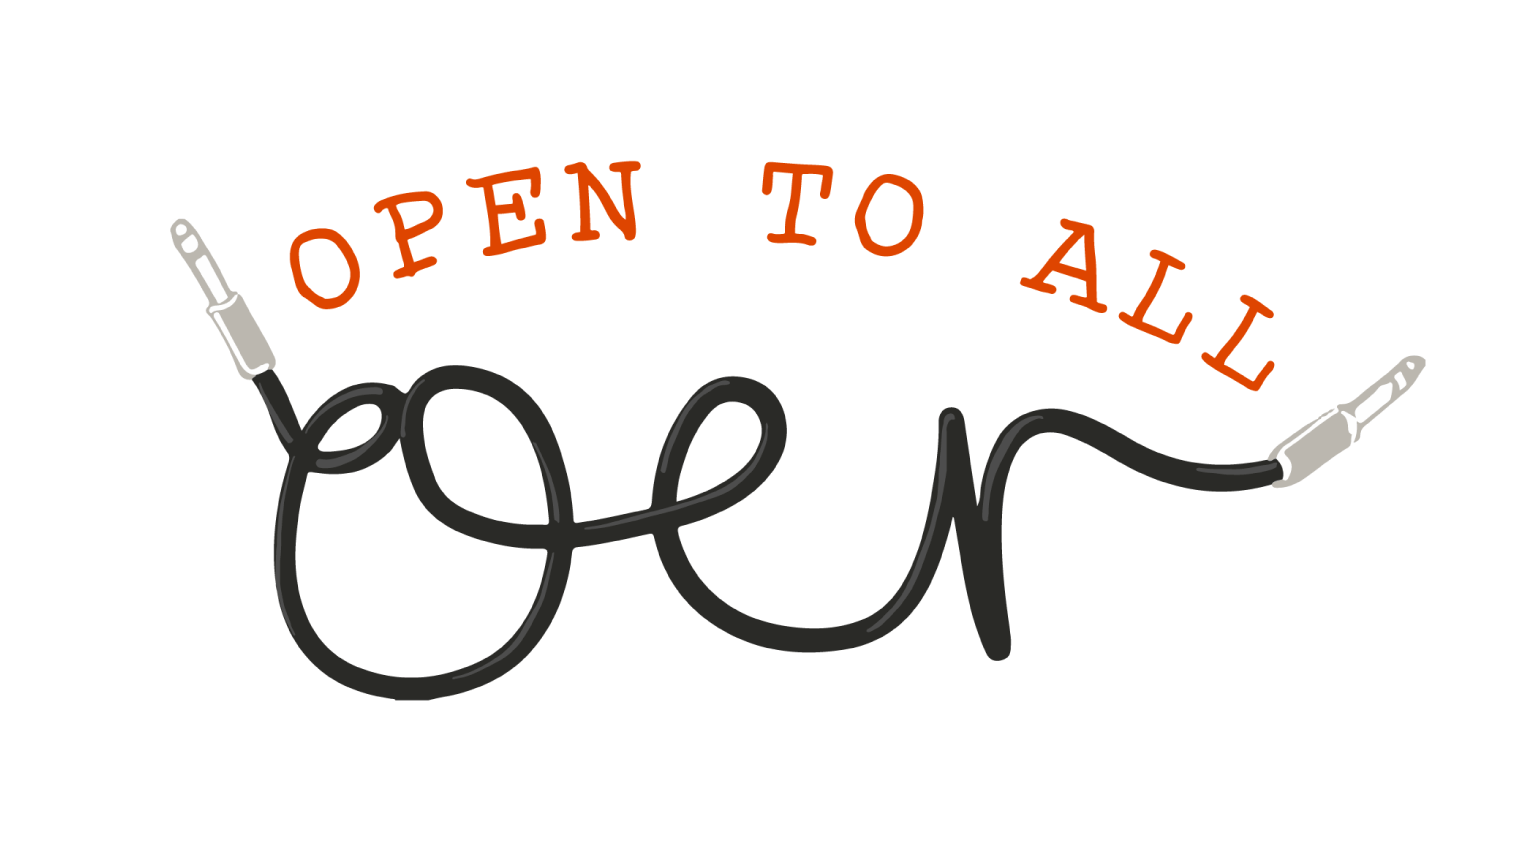 OER - Open to all